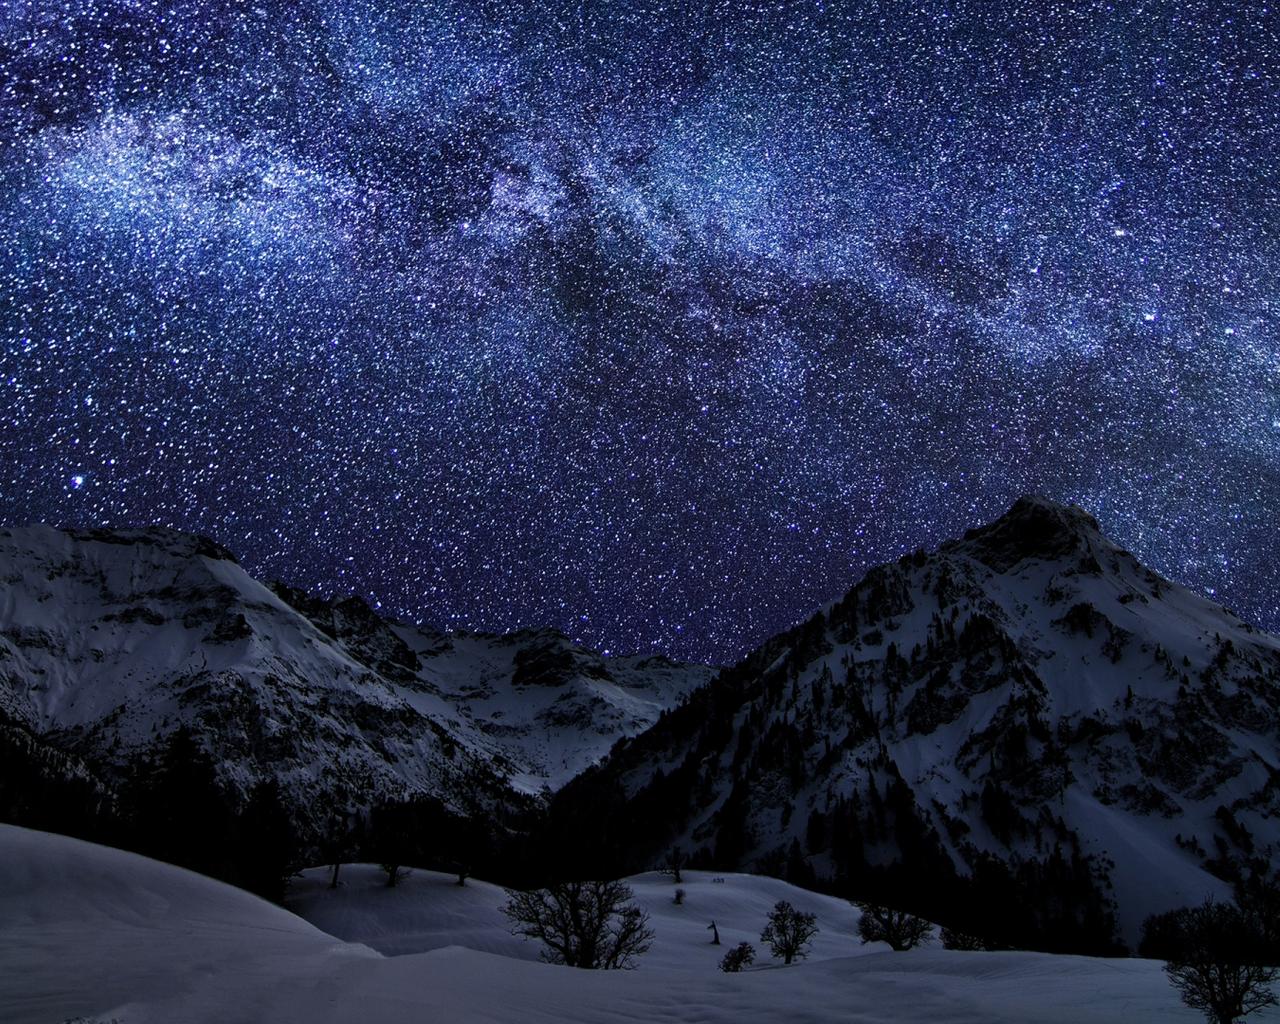 A winter night with many stars